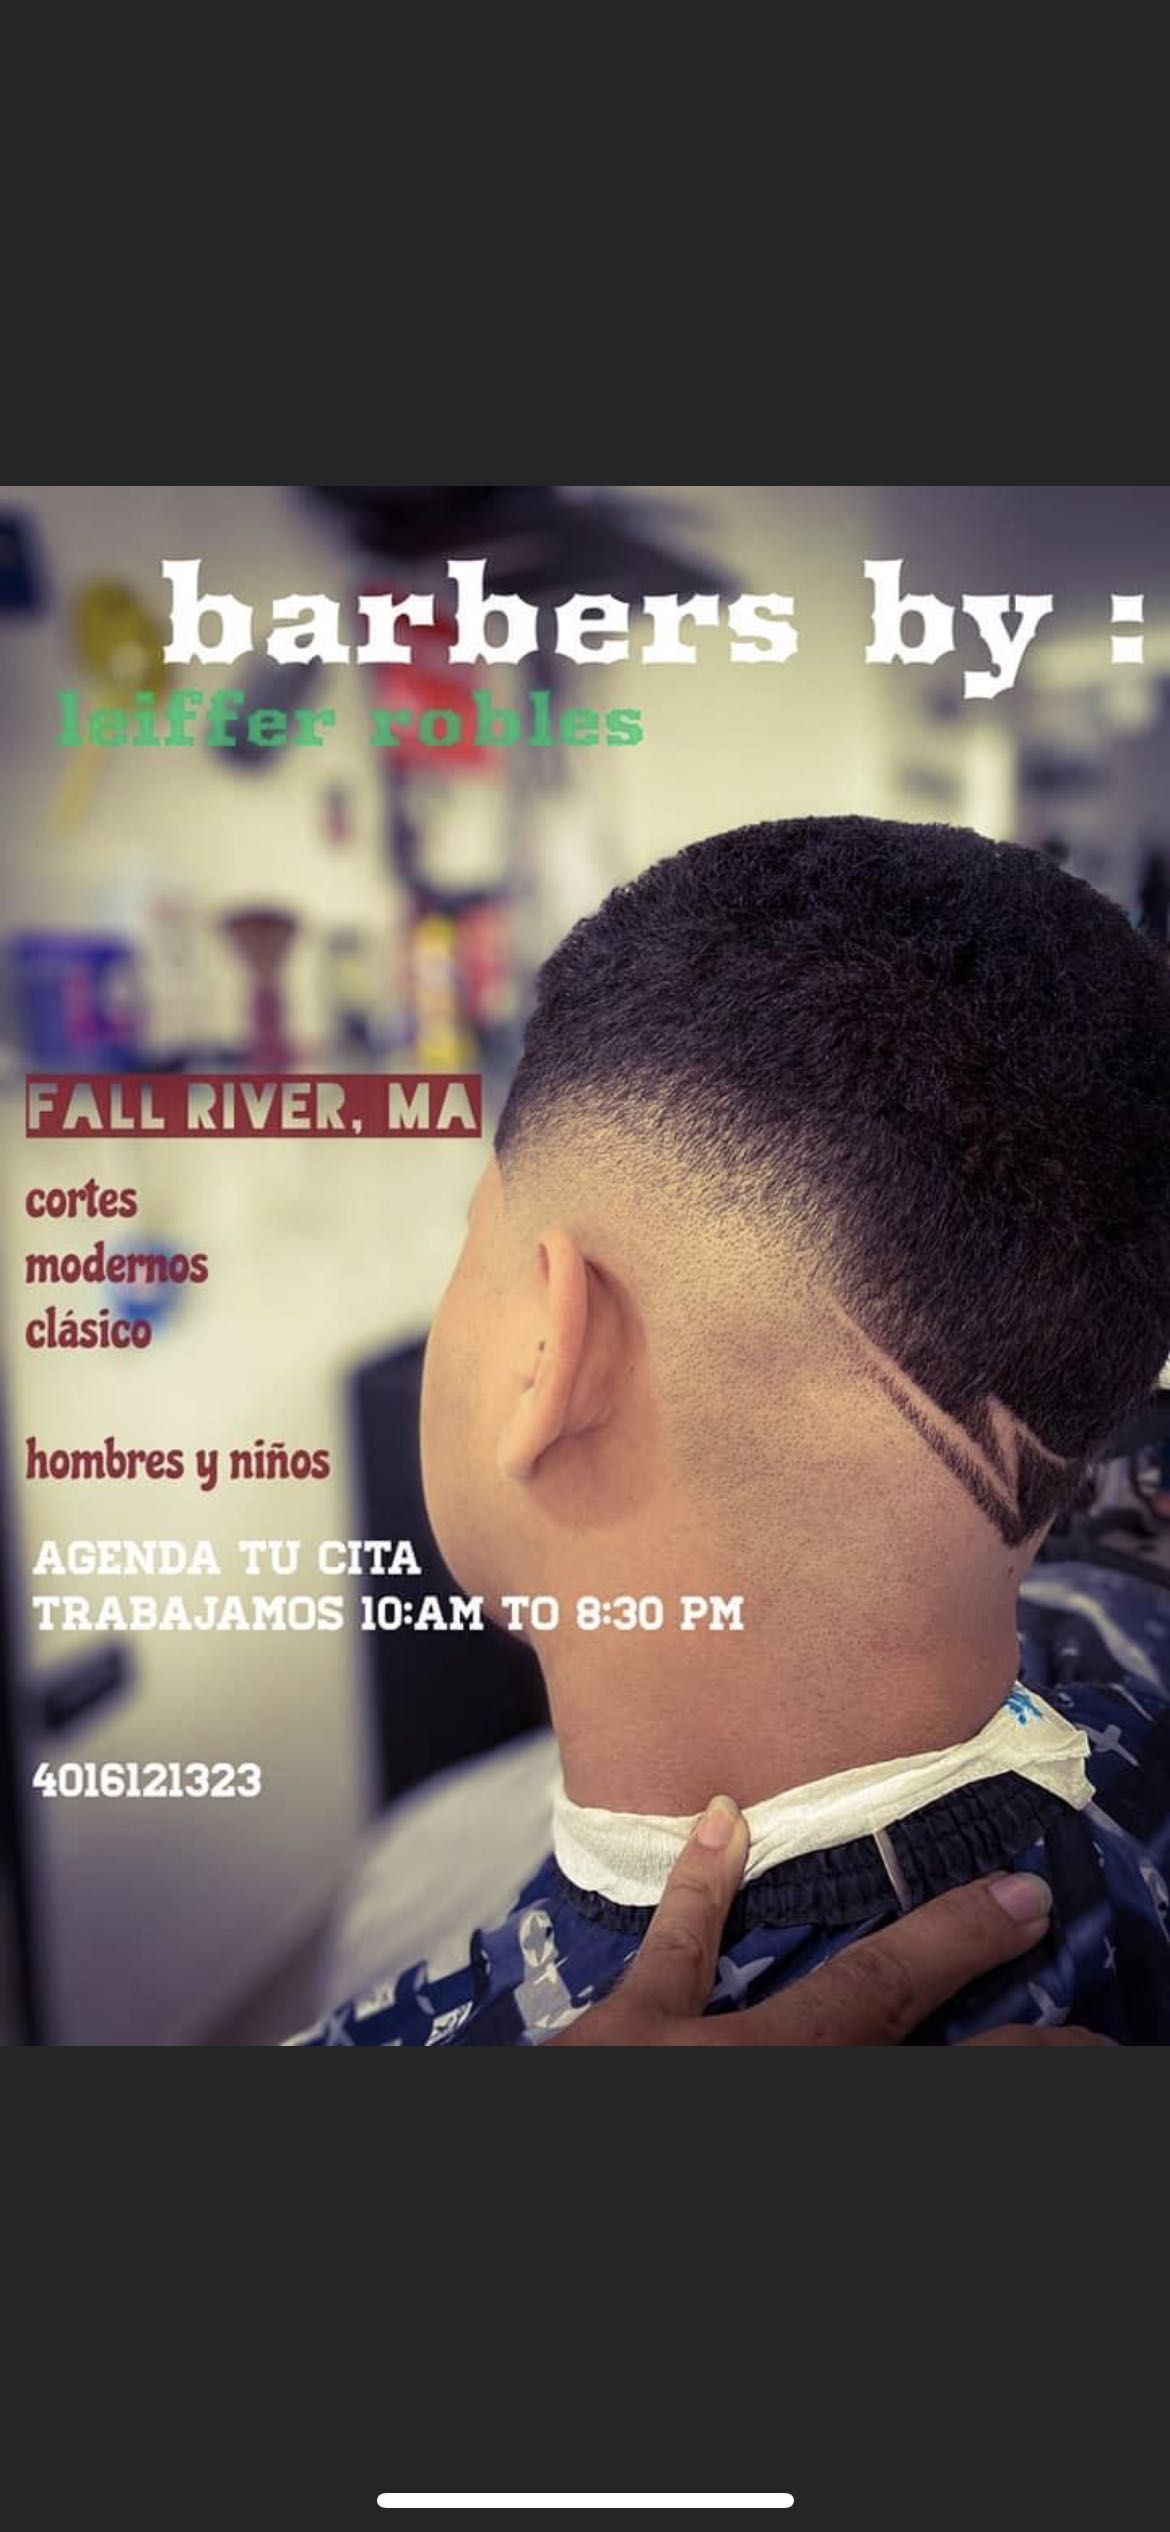 Leiffer robles barber’s, 744 Plymouth Ave, Fall River, 02721